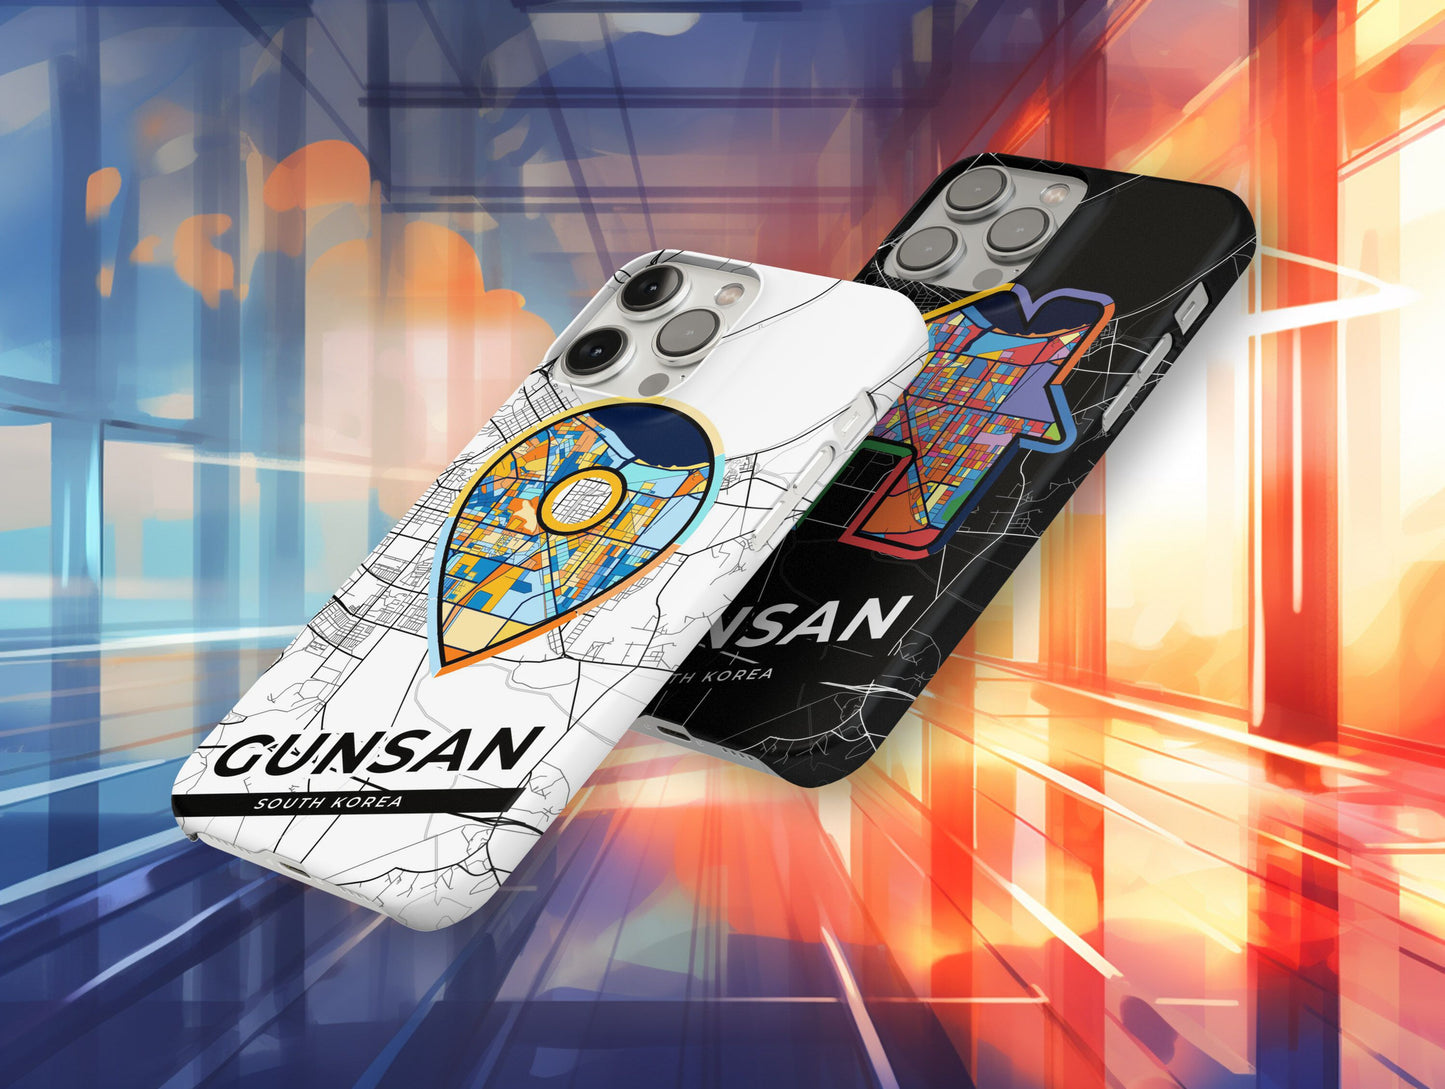 Gunsan South Korea slim phone case with colorful icon. Birthday, wedding or housewarming gift. Couple match cases.